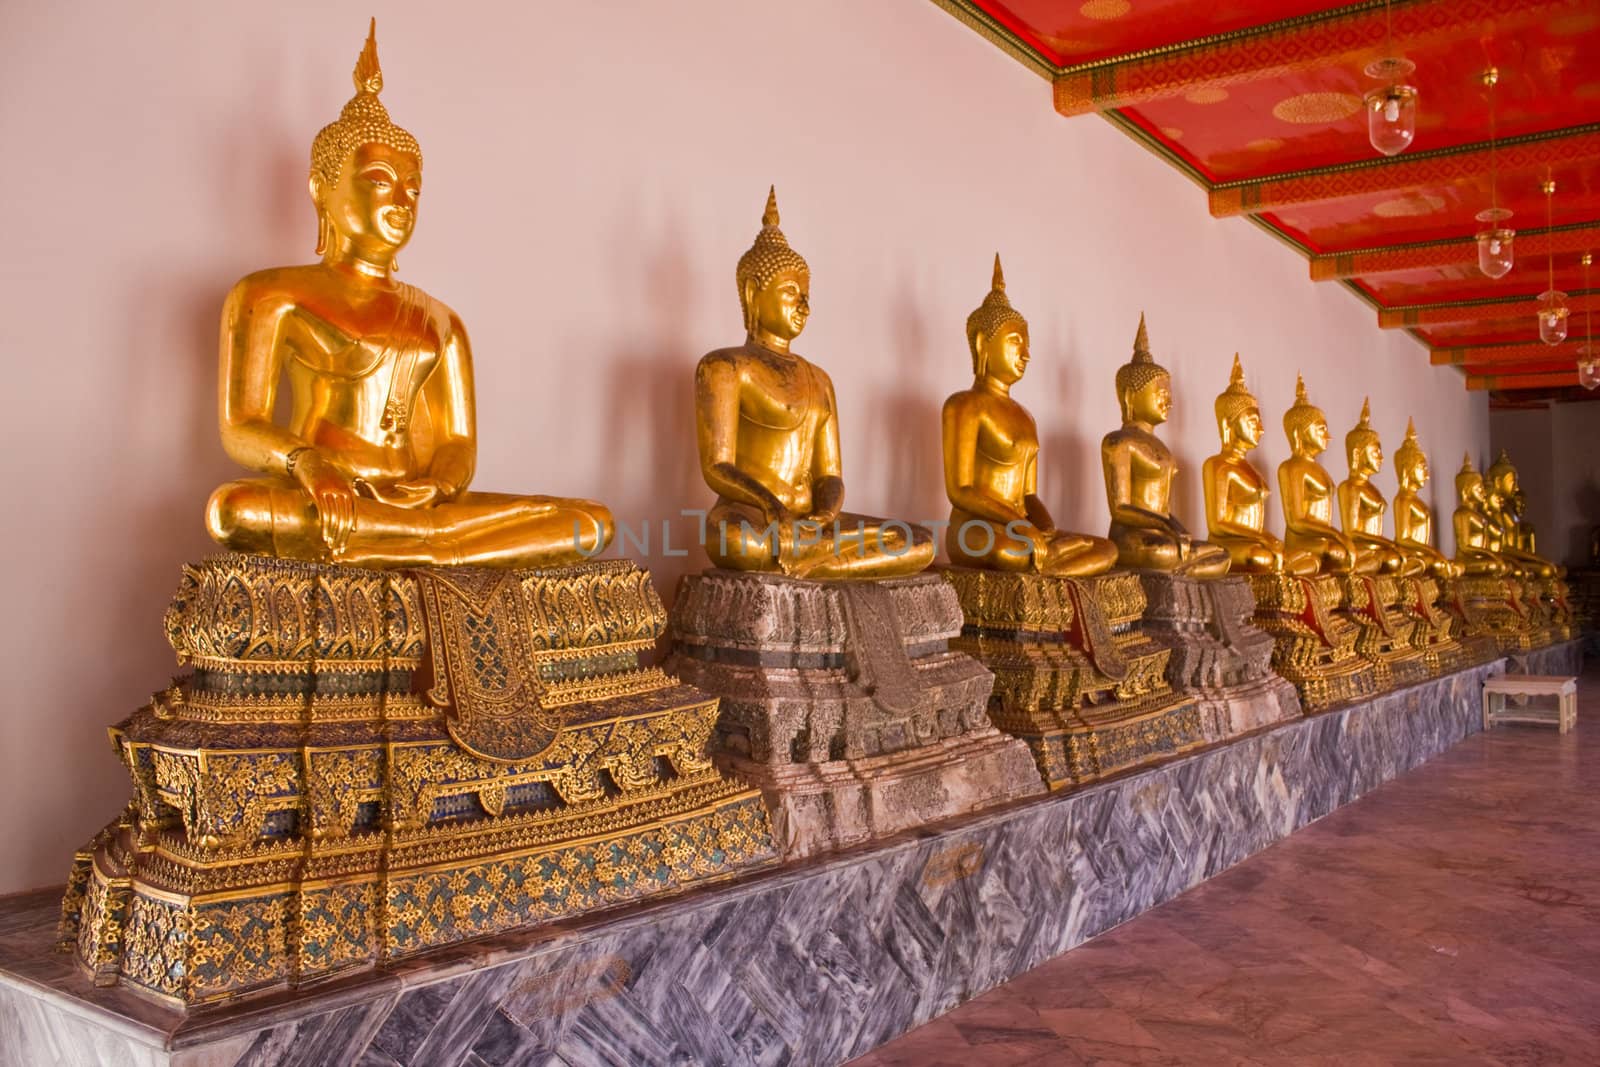 Images of Buddha in Wat Pho temple